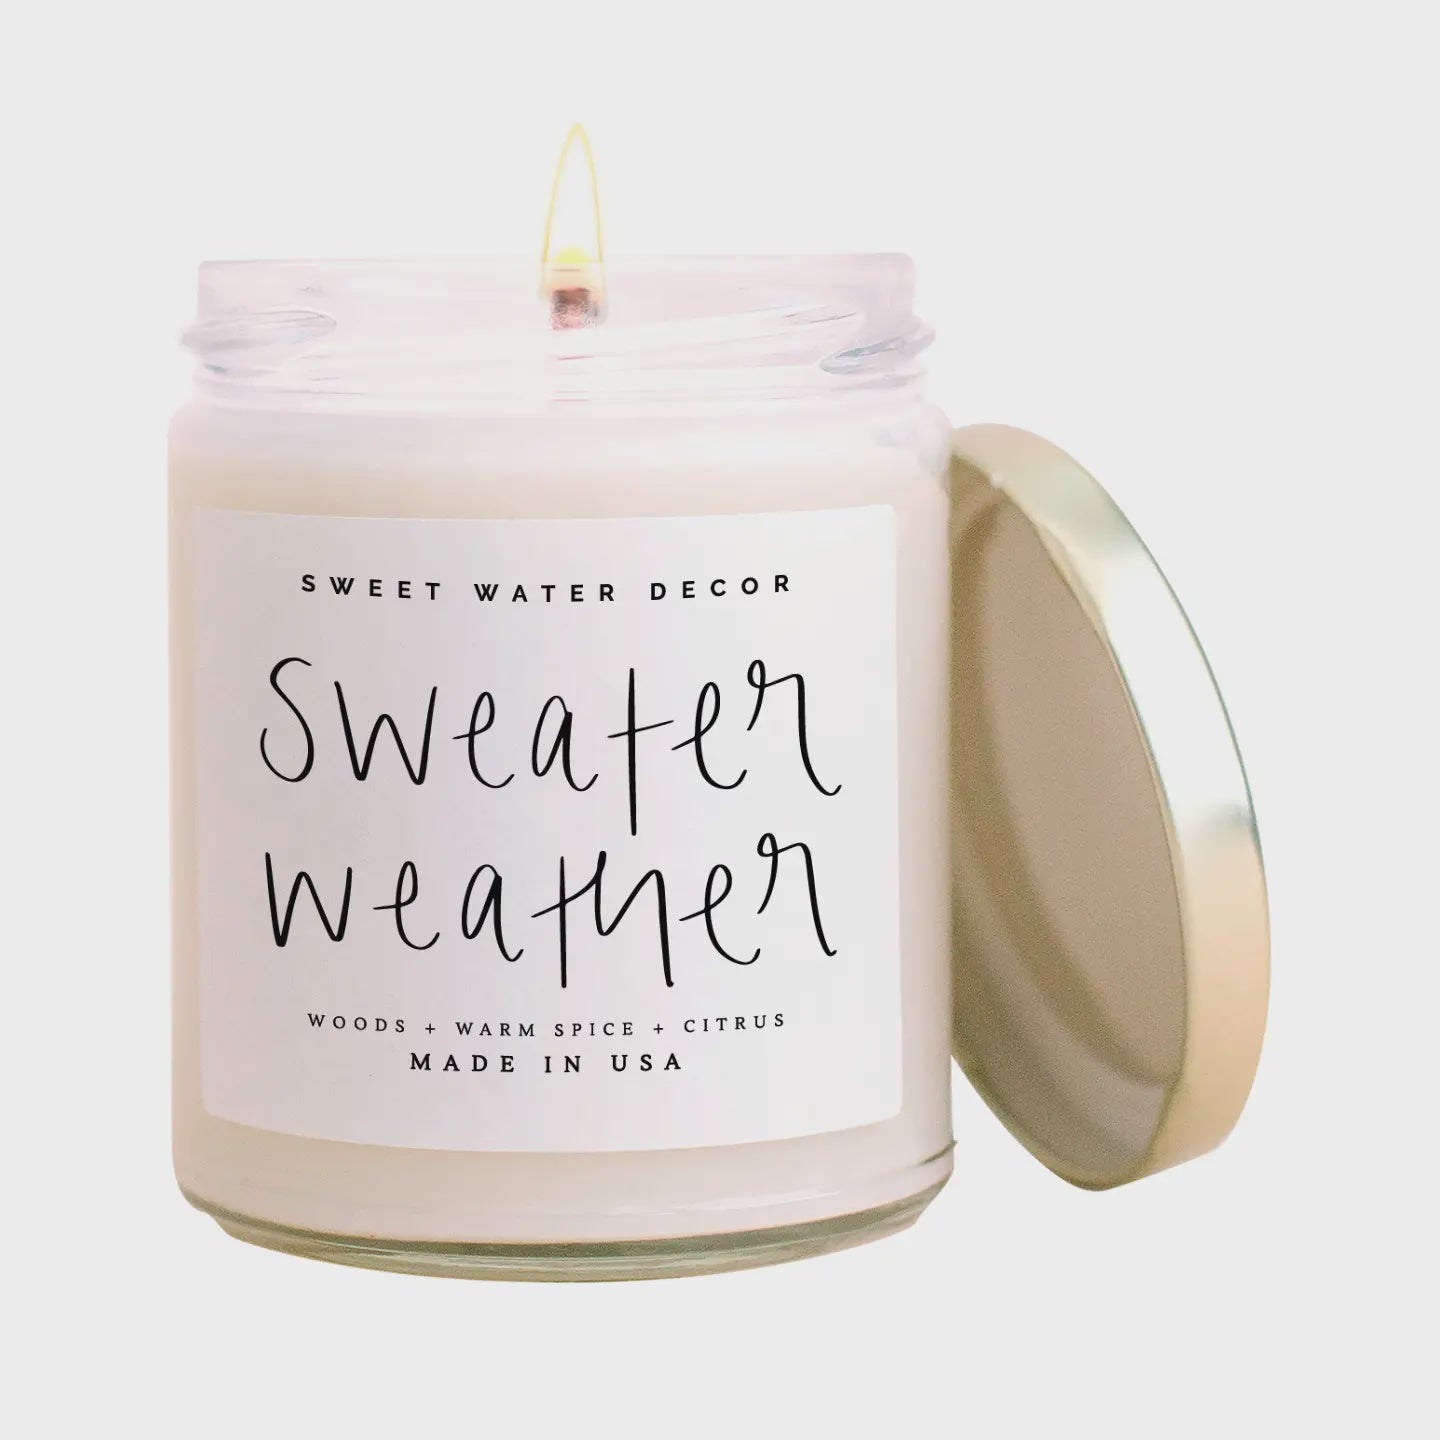 The Sweater Weather Soy Candle in Clear Jar by Sweet Water Decor